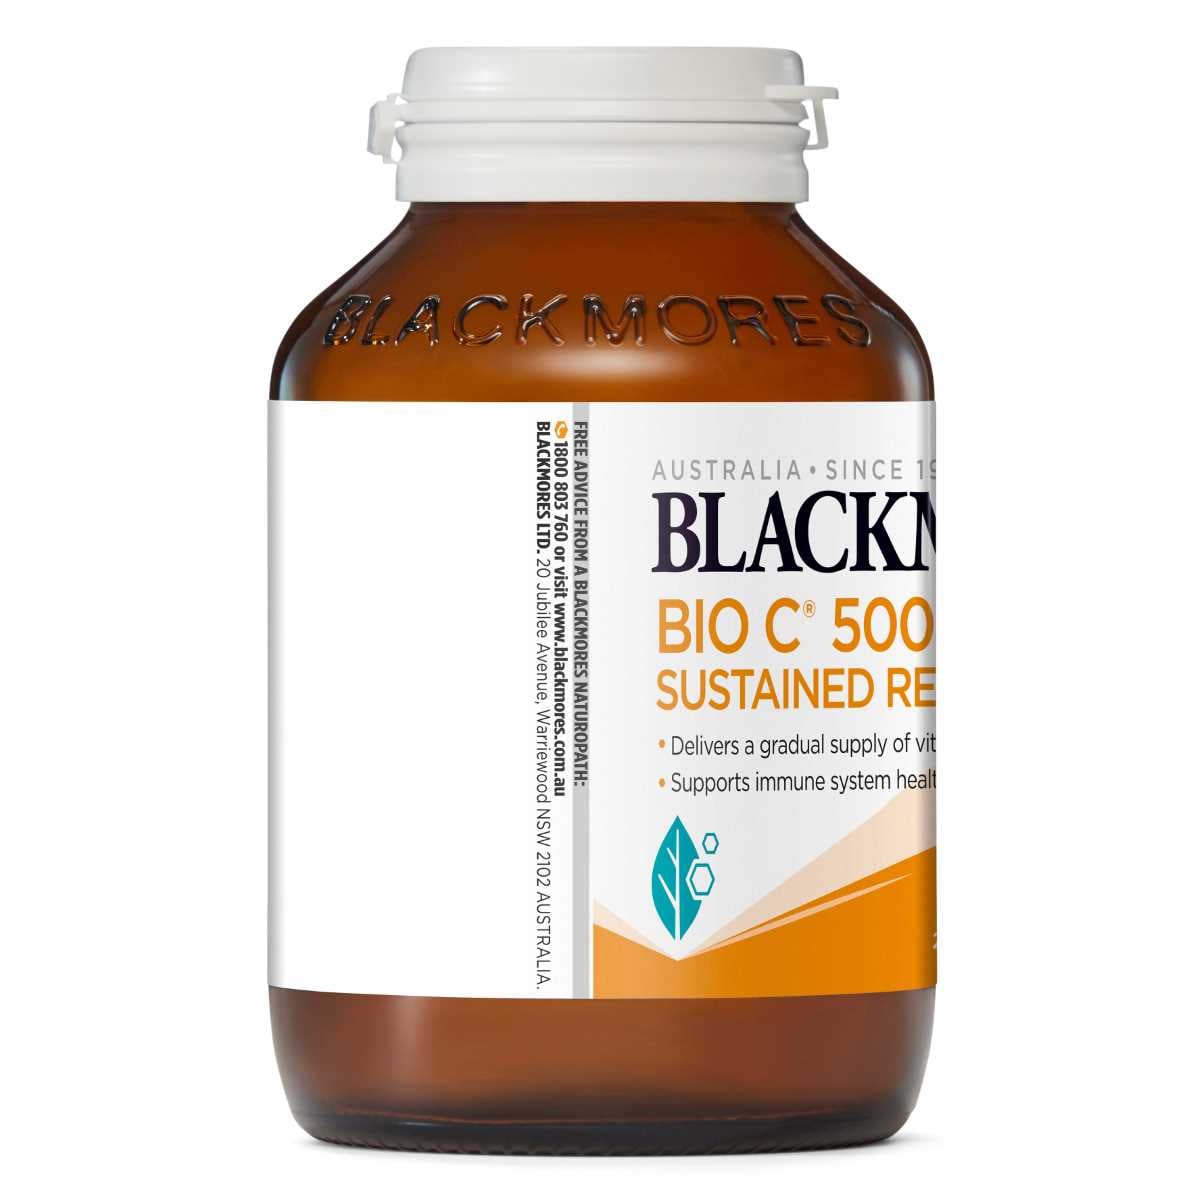 Blackmores Bio C 500 Sustained Release 200 Tablets